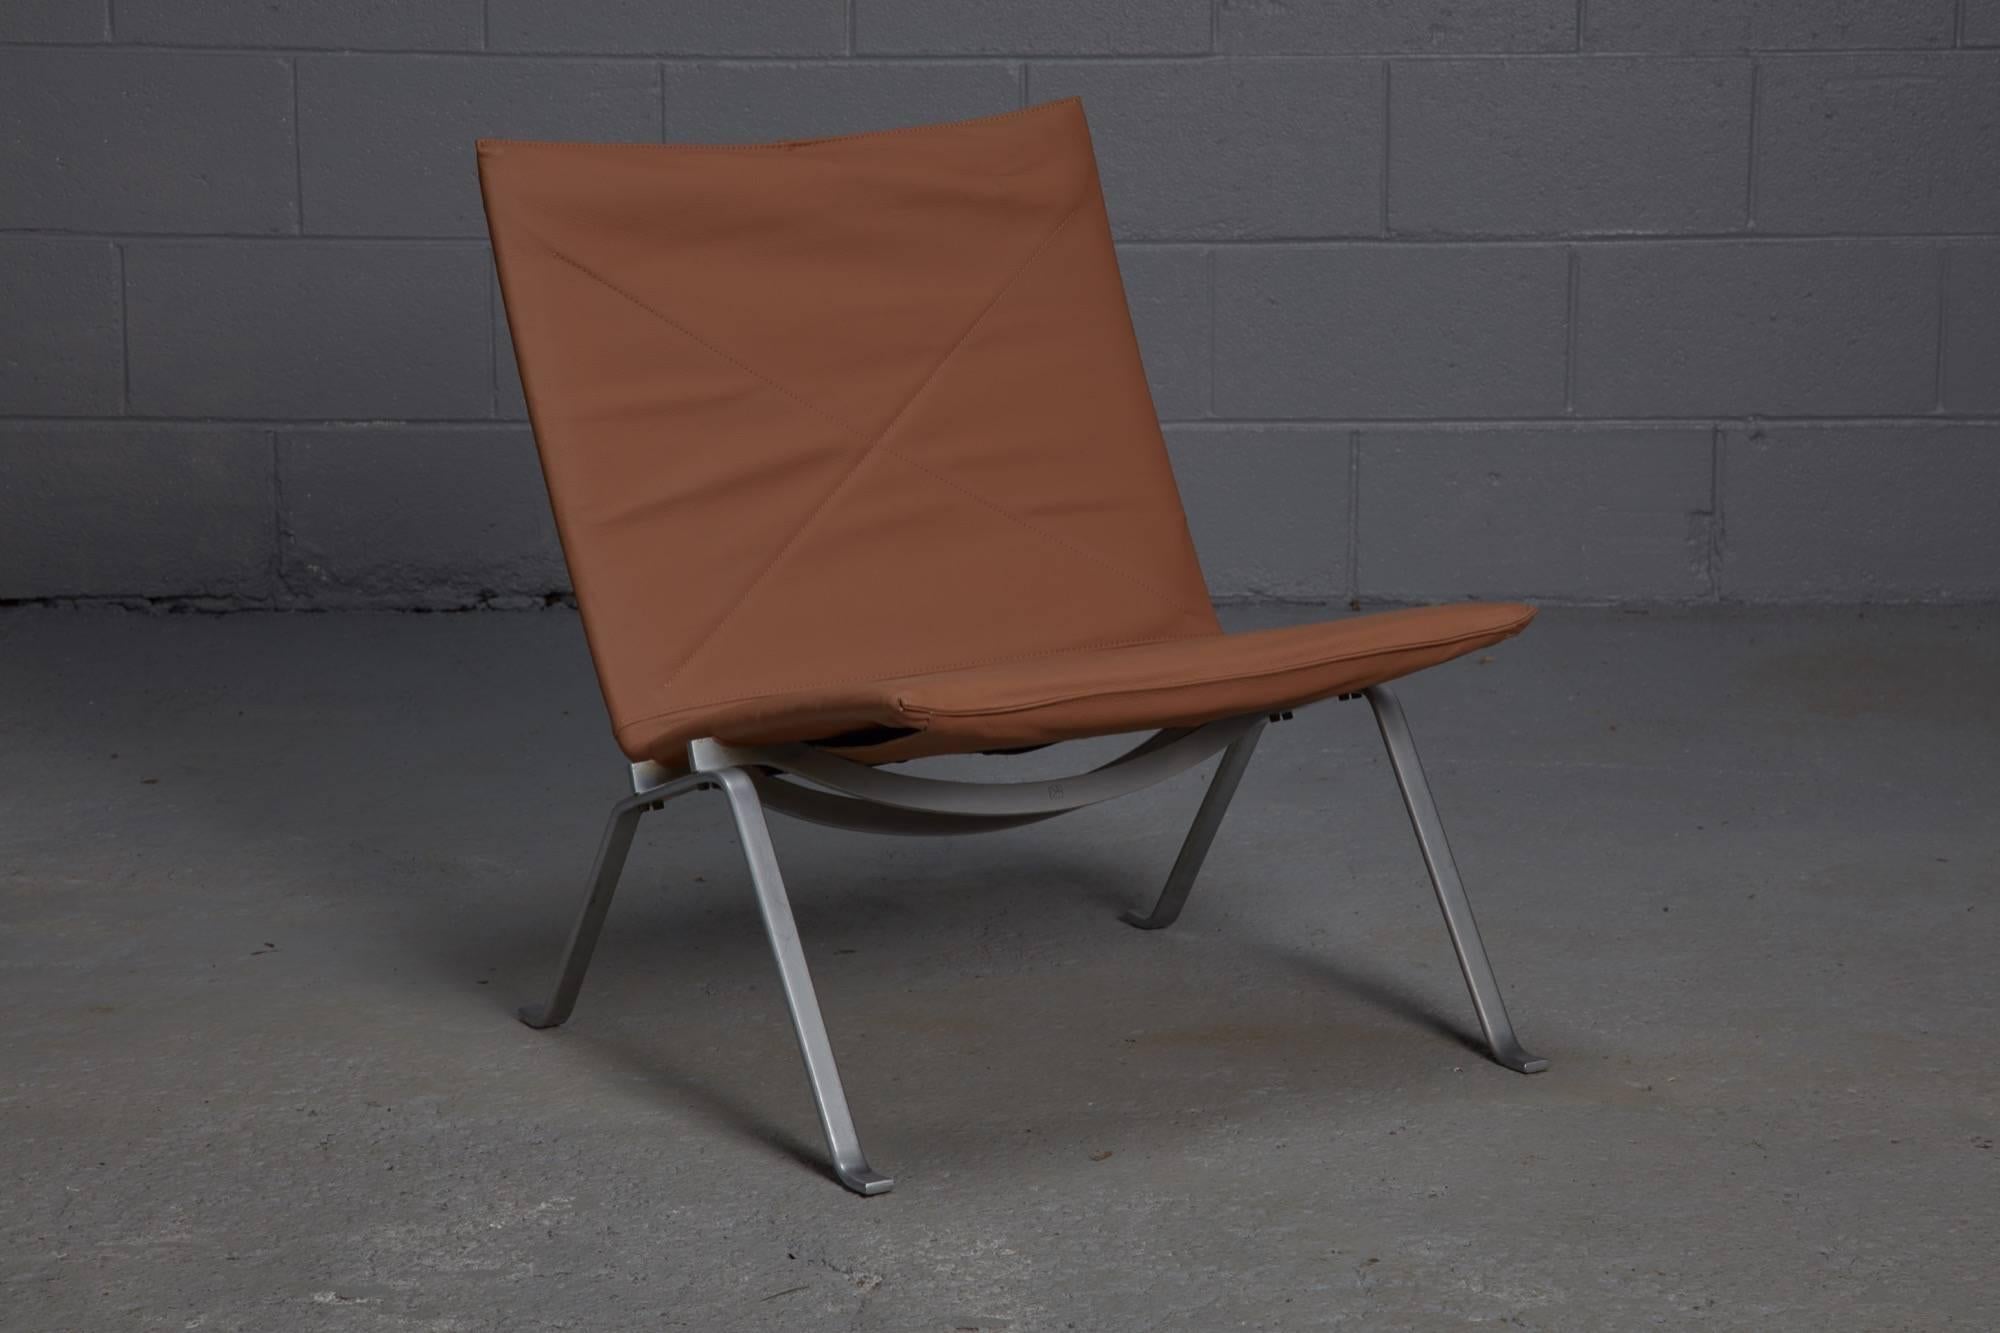 Designed by Poul Kjaerholm for his friend and manufacturer E. Kold Christiensen, the PK22 is made from brown leather and stainless steel. While many of Kjaerholm's contemporaries primarily used wood in their furniture designs, Kjaerholm favored